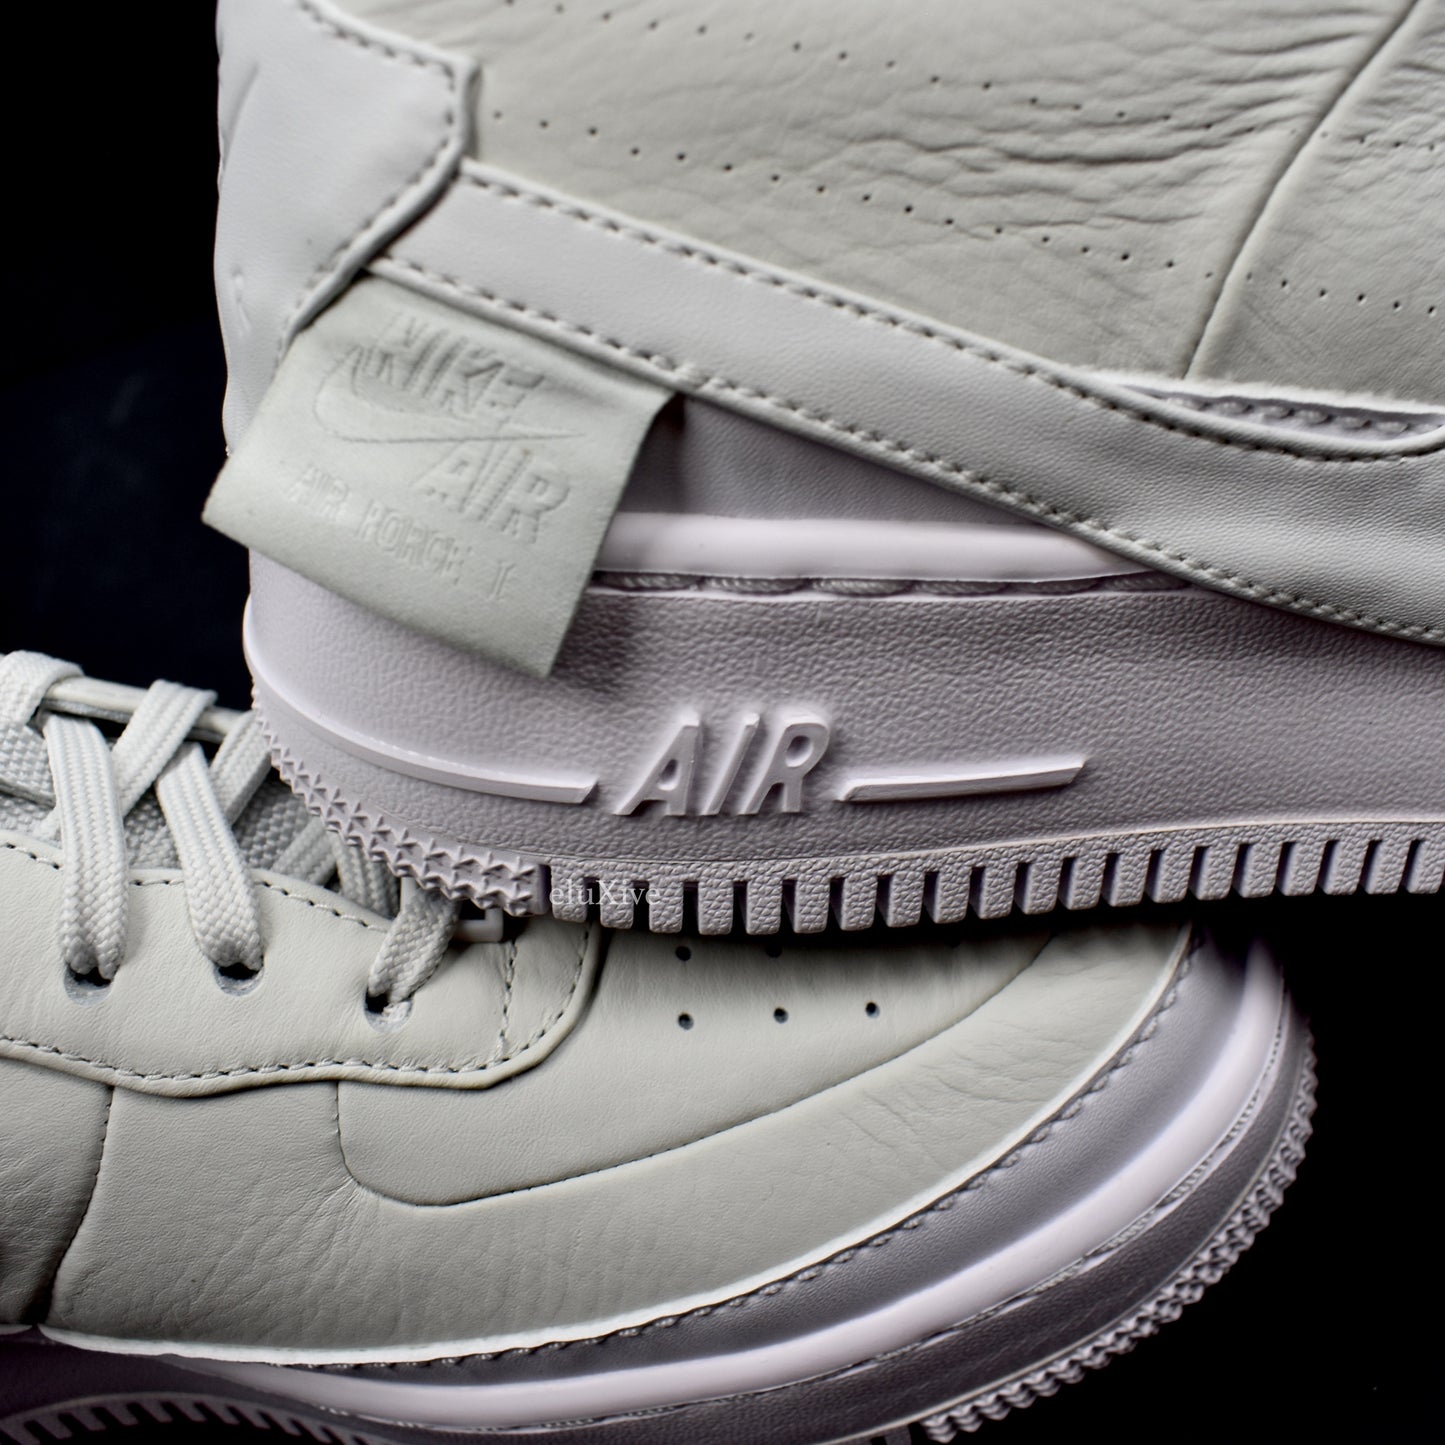 Nike - W Air Force 1 Jester XX (Off White)